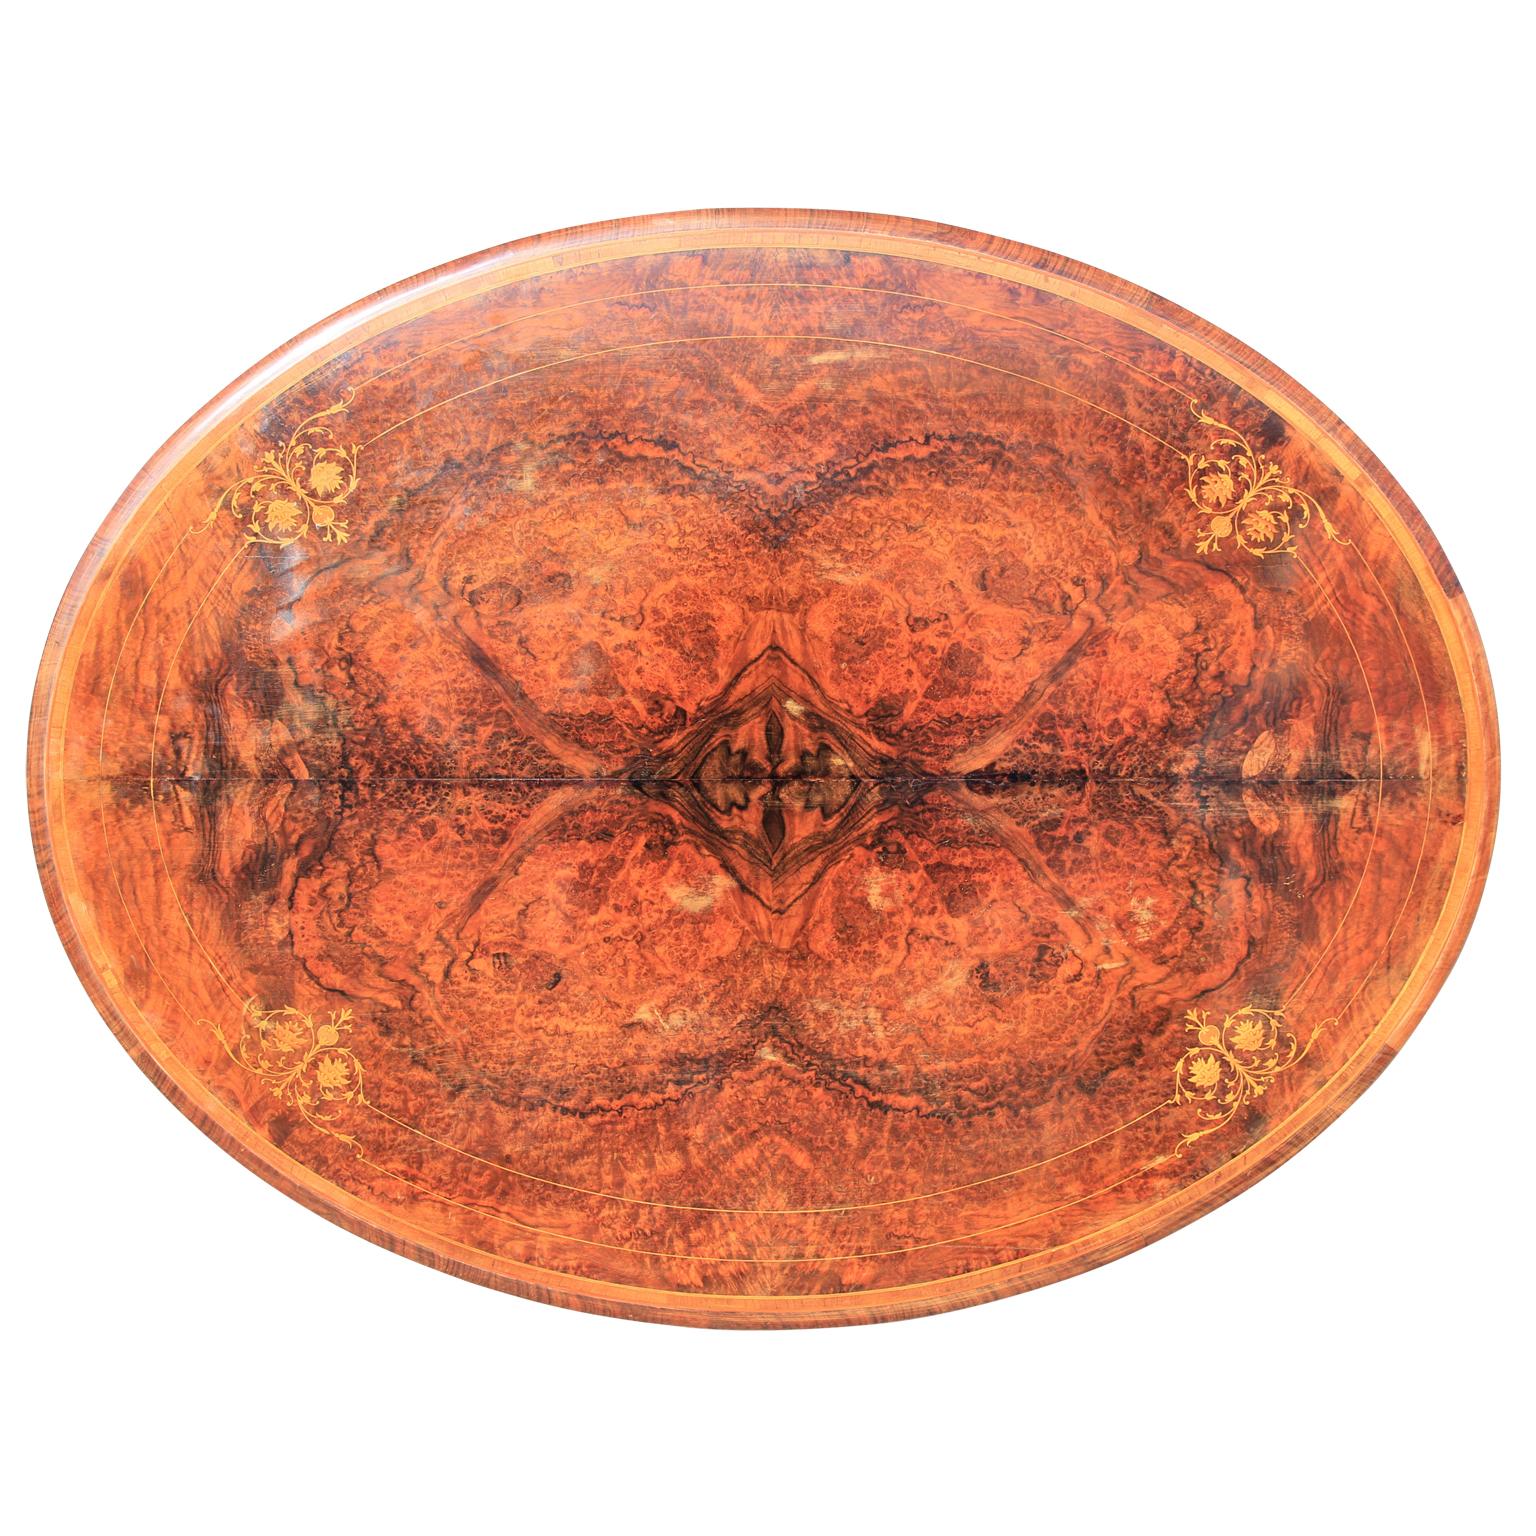 Inlay Victorian Oval Walnut and Satinwood Inlaid and Hand-Carved Oval Tilt-Top Table